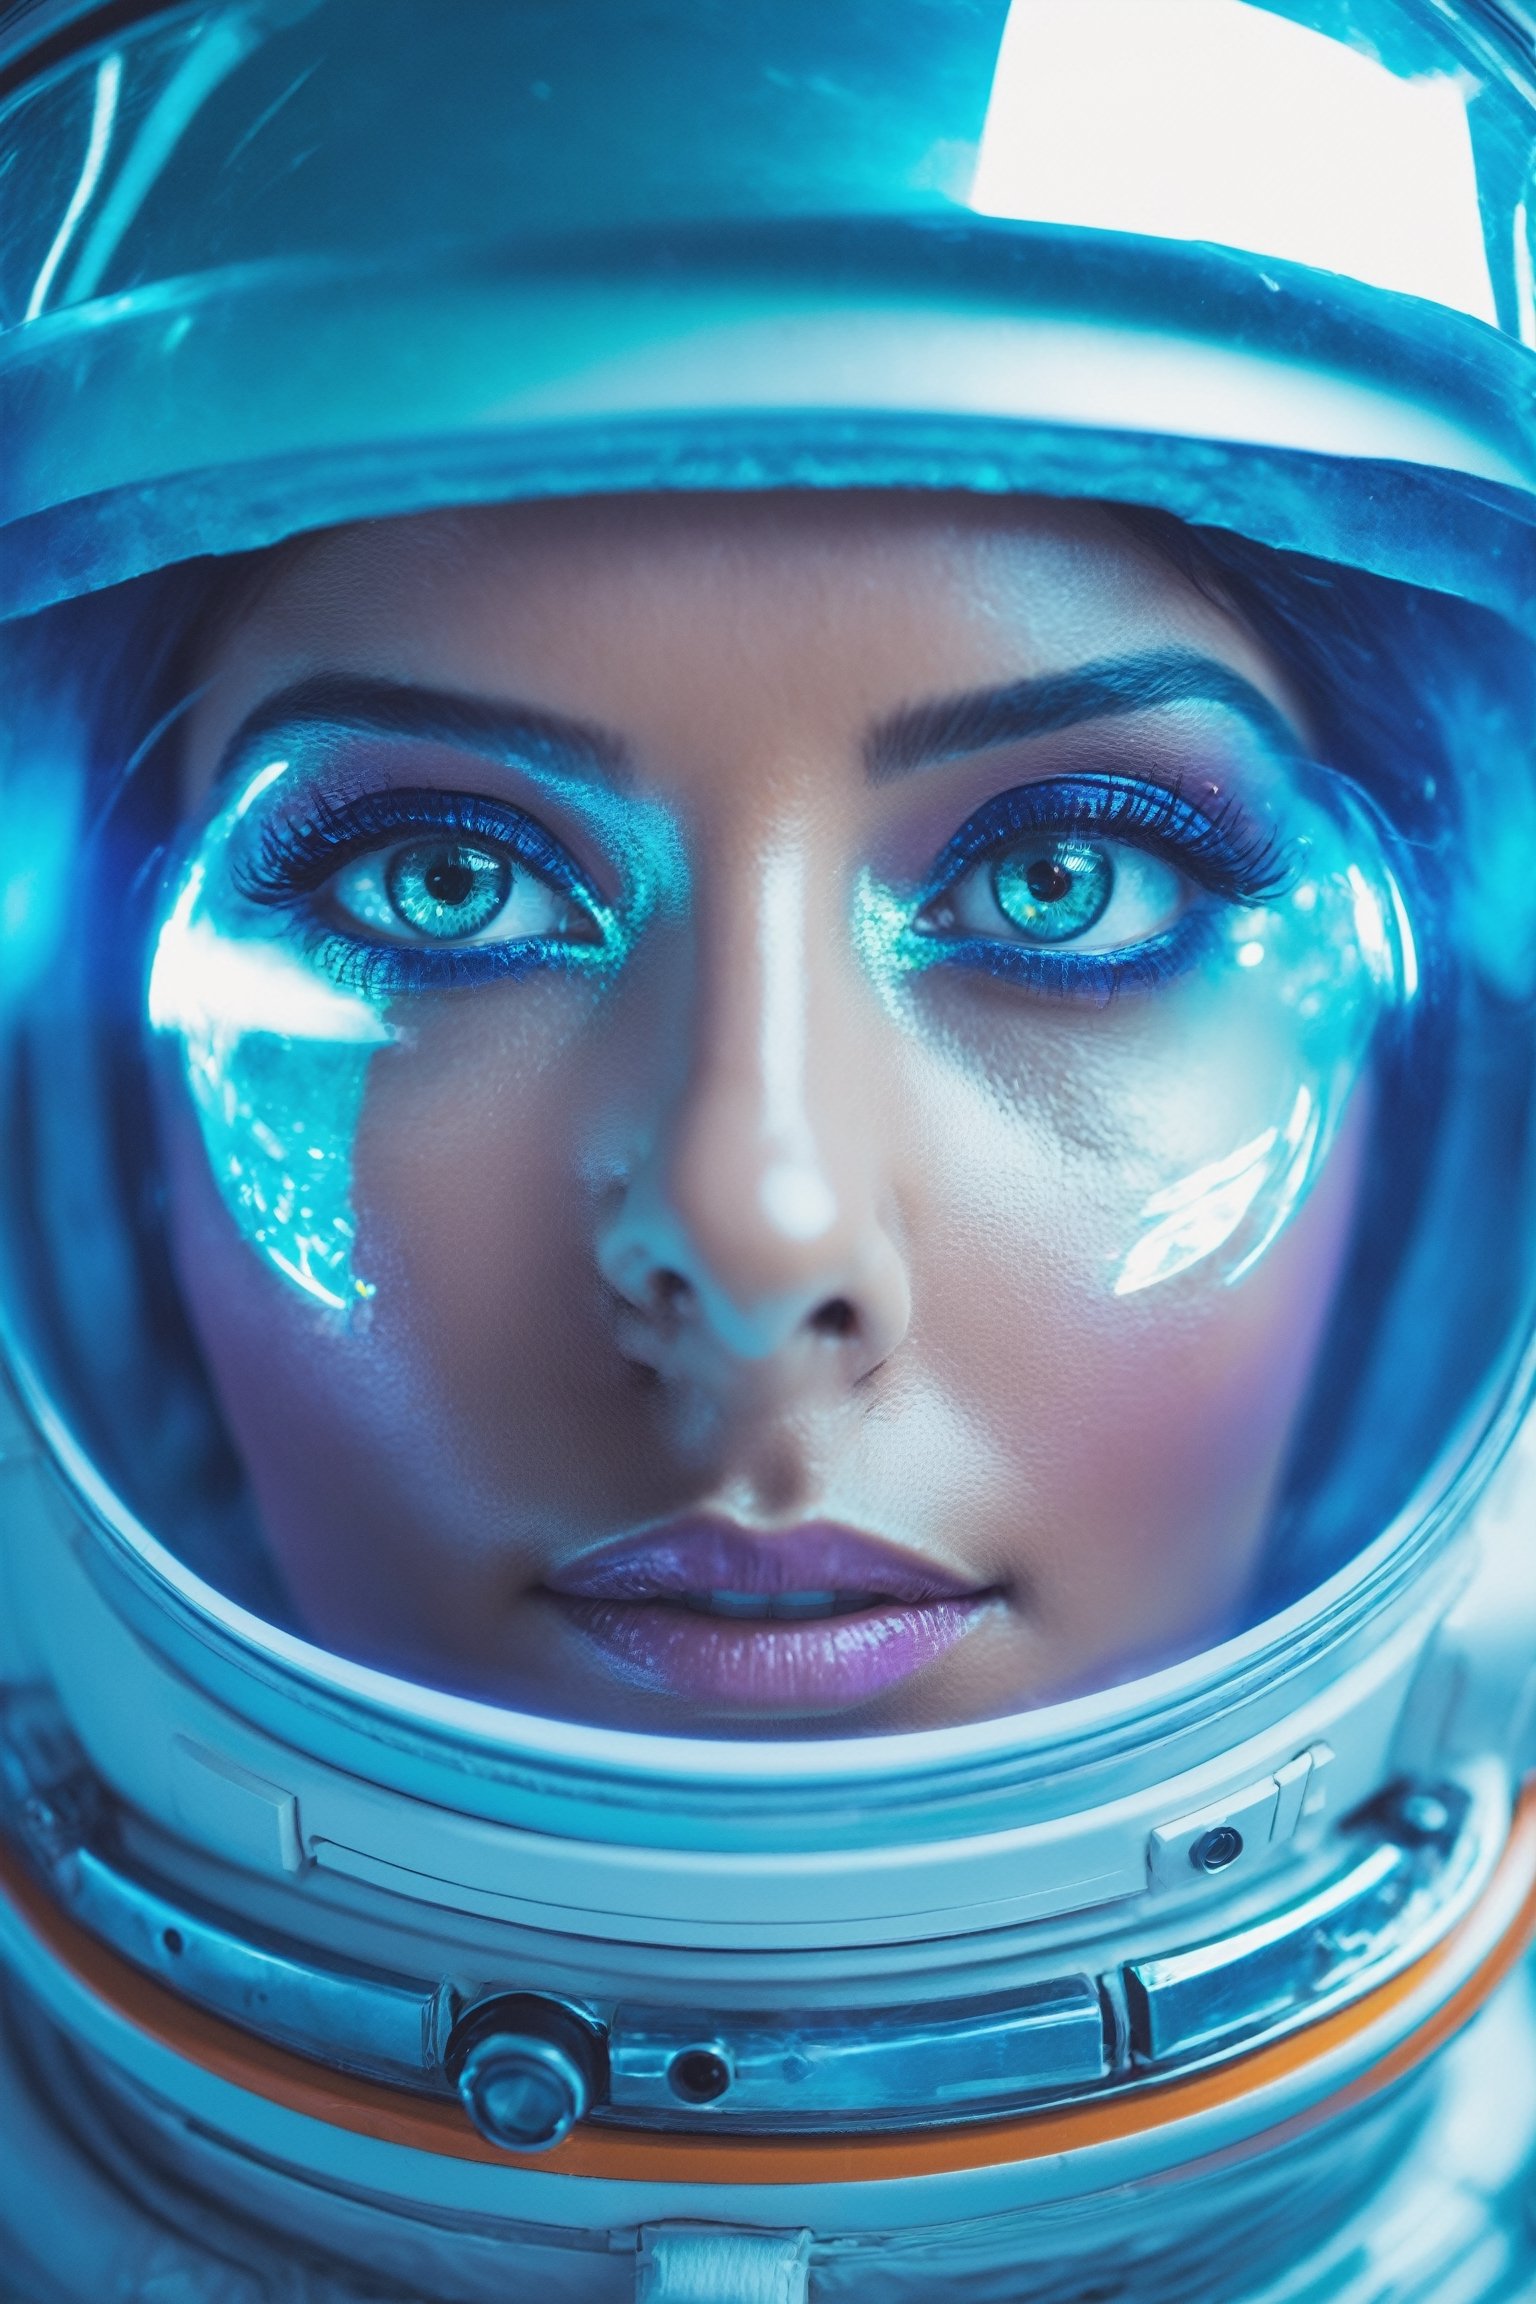 sci-fi style futuristic astronaut woman closeup portrait, detailed eyes, vibrant colours, glass reflections, dry skin, fuzzy skin, lens flare, futuristic, technological, alien worlds, space themes, advanced civilizations).